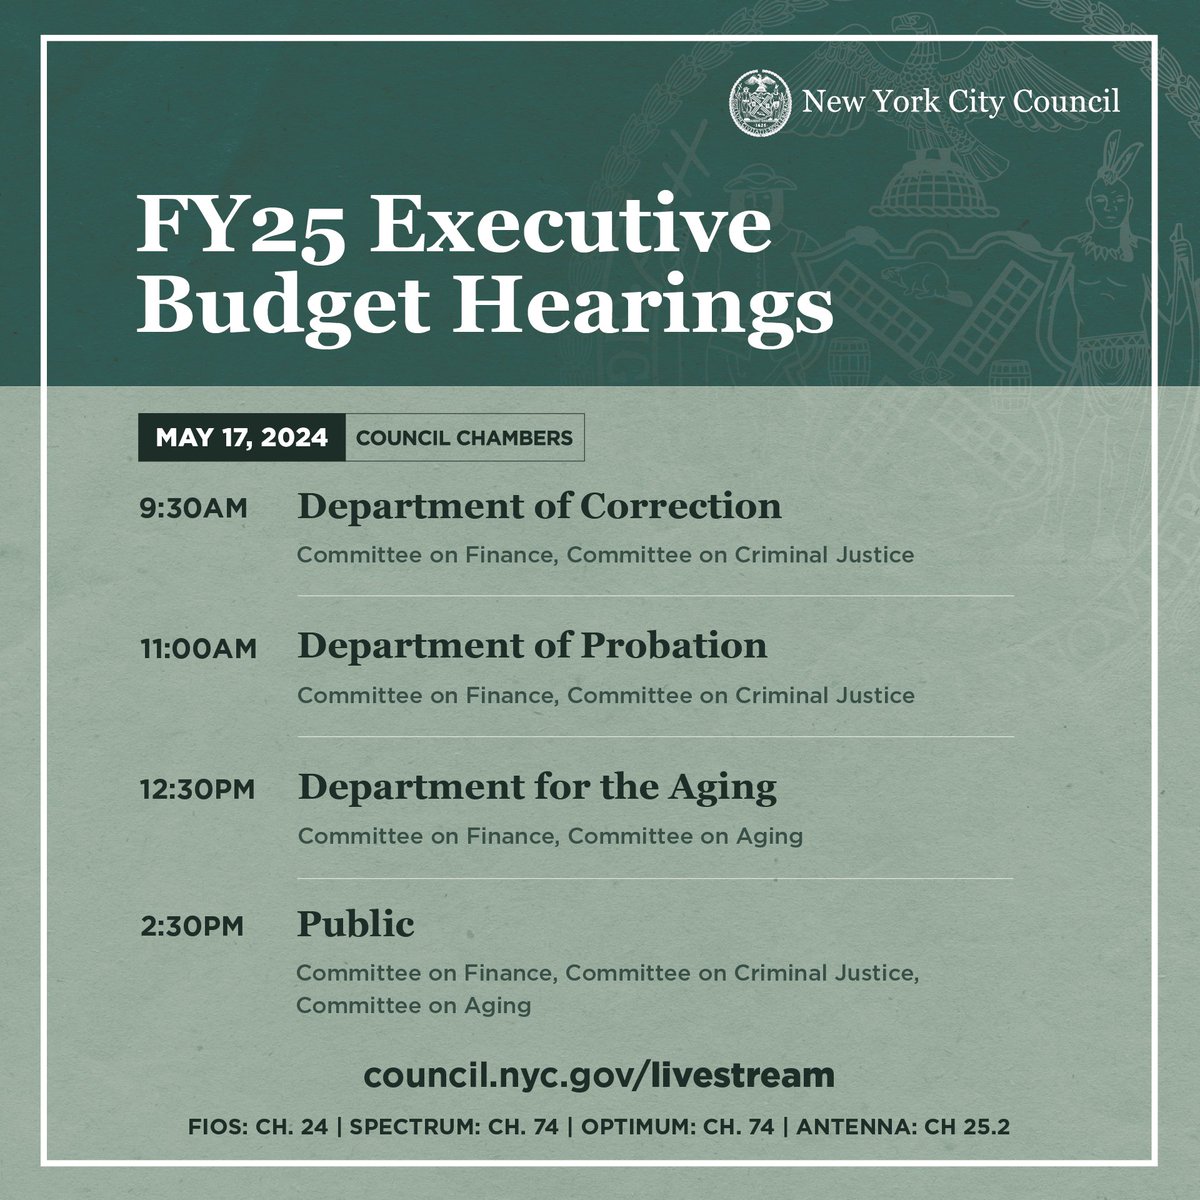 Tune in tomorrow for Day 9 of our FY25 Executive Budget Hearings, featuring testimony from @CorrectionNYC, @nycprobation, and @NYCAging. 📺 Watch live: council.nyc.gov/livestream/